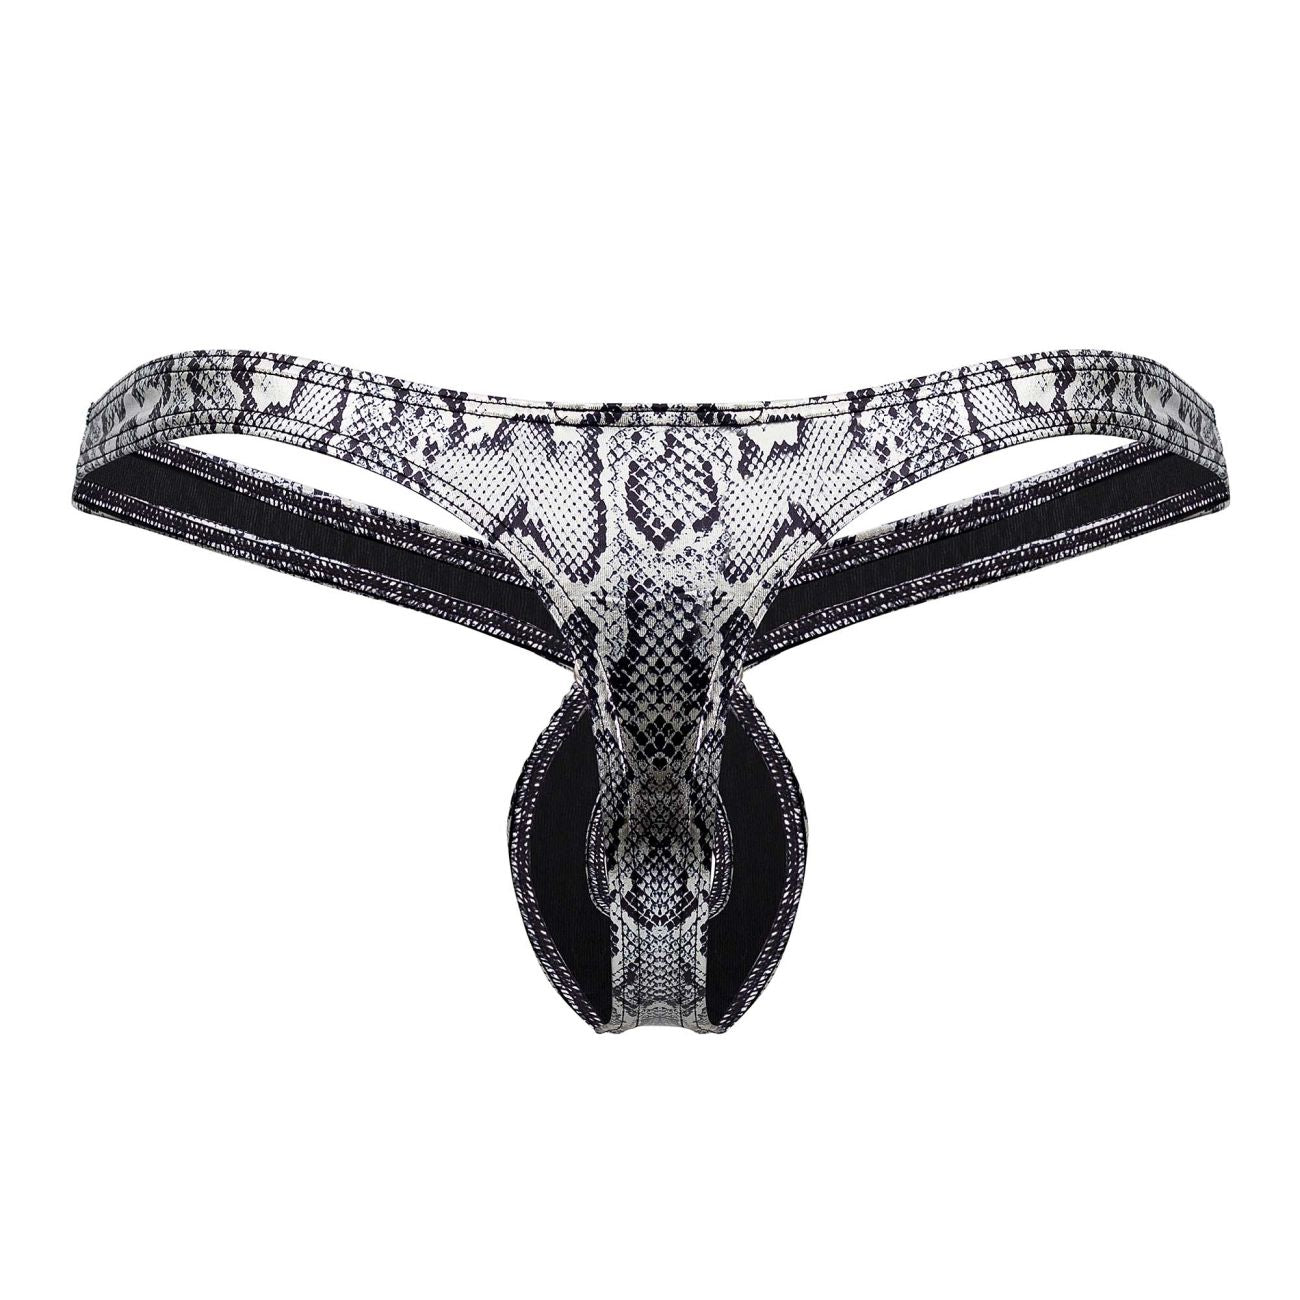 Male Power 409-282 S-naked Criss Cross Thong Silver-Black